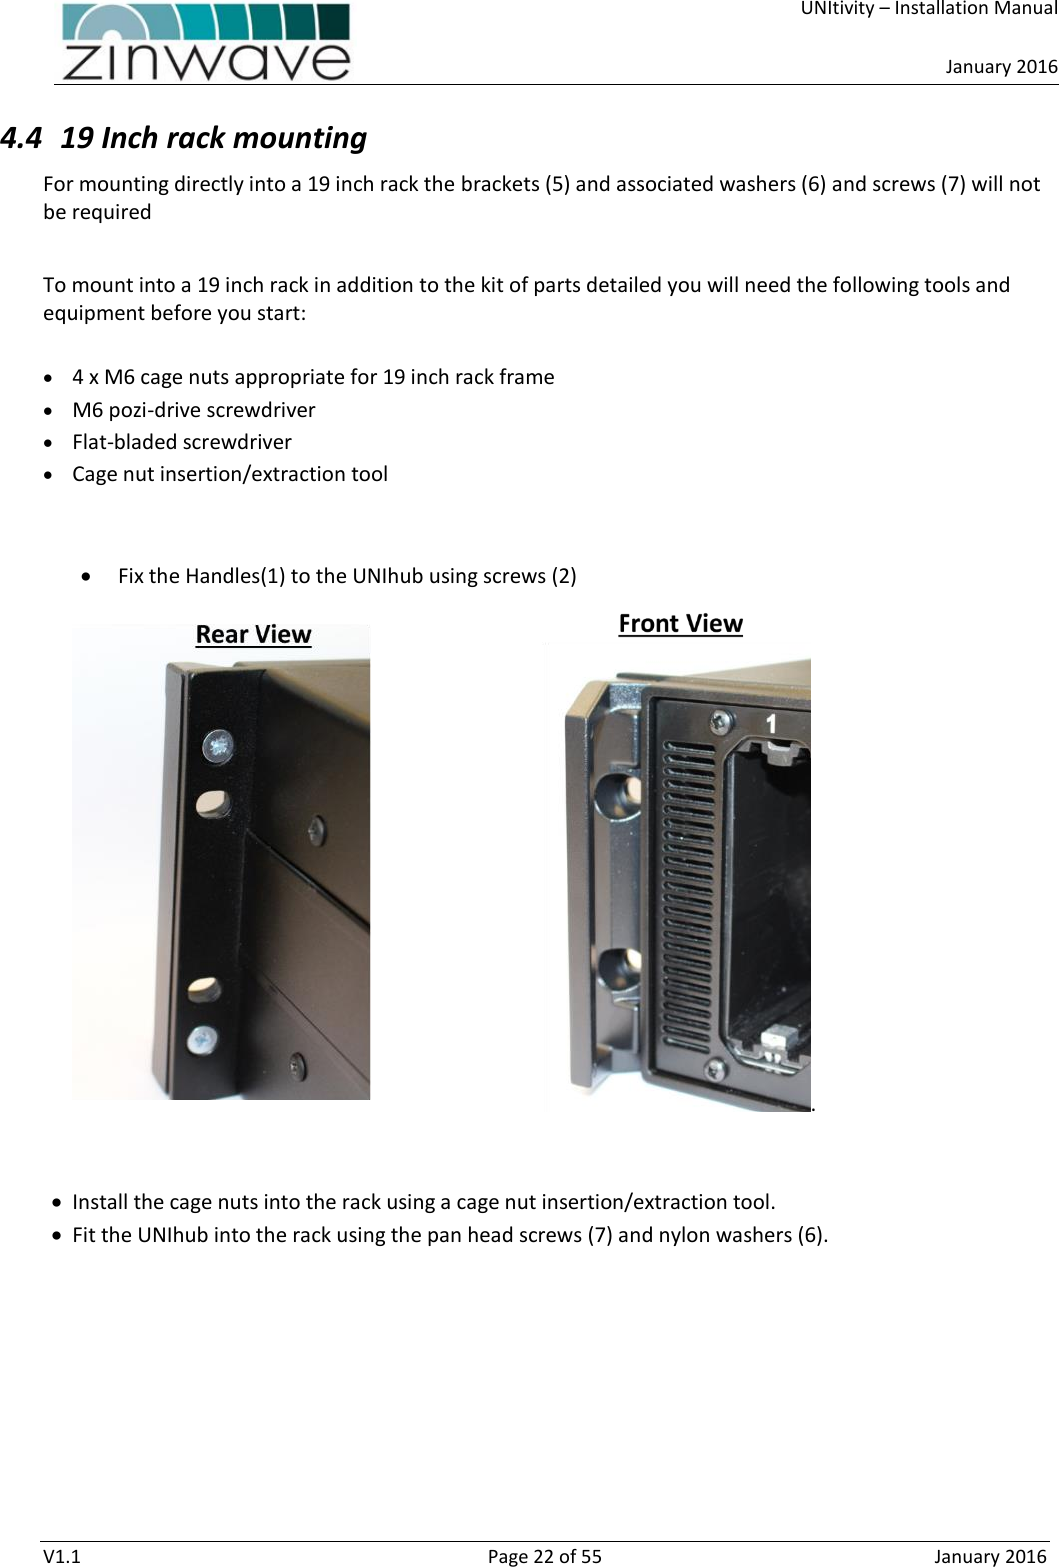     UNItivity – Installation Manual      January 2016  V1.1  Page 22 of 55  January 2016 4.4 19 Inch rack mounting For mounting directly into a 19 inch rack the brackets (5) and associated washers (6) and screws (7) will not be required  To mount into a 19 inch rack in addition to the kit of parts detailed you will need the following tools and equipment before you start:   4 x M6 cage nuts appropriate for 19 inch rack frame  M6 pozi-drive screwdriver  Flat-bladed screwdriver  Cage nut insertion/extraction tool    Fix the Handles(1) to the UNIhub using screws (2) .     Install the cage nuts into the rack using a cage nut insertion/extraction tool.   Fit the UNIhub into the rack using the pan head screws (7) and nylon washers (6).    